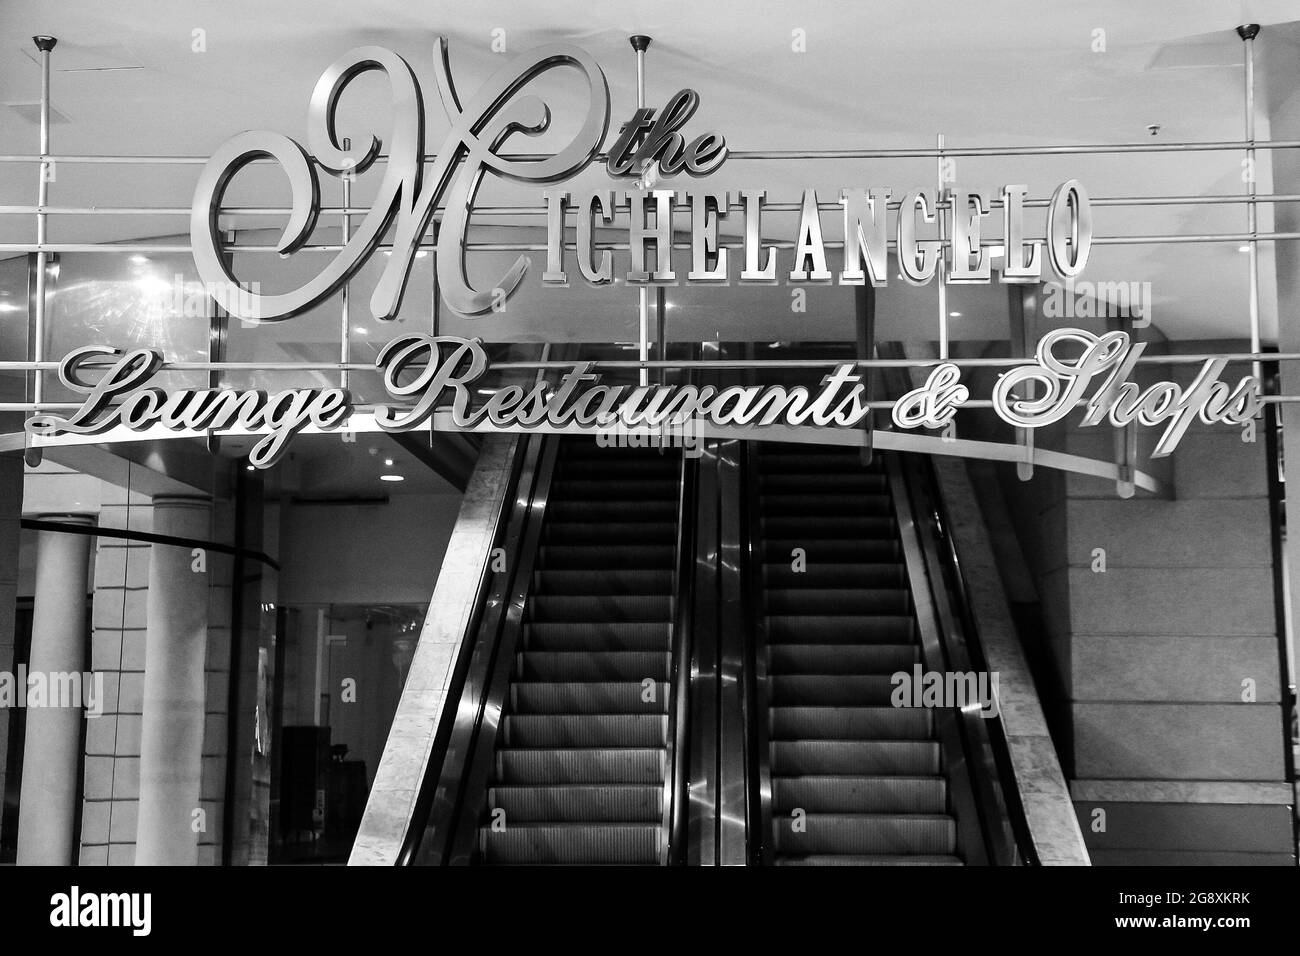 JOHANNESBURG, SOUTH AFRICA - Jan 05, 2021: The front entrance sign of a 5 star hotel, called Michelangelo Stock Photo